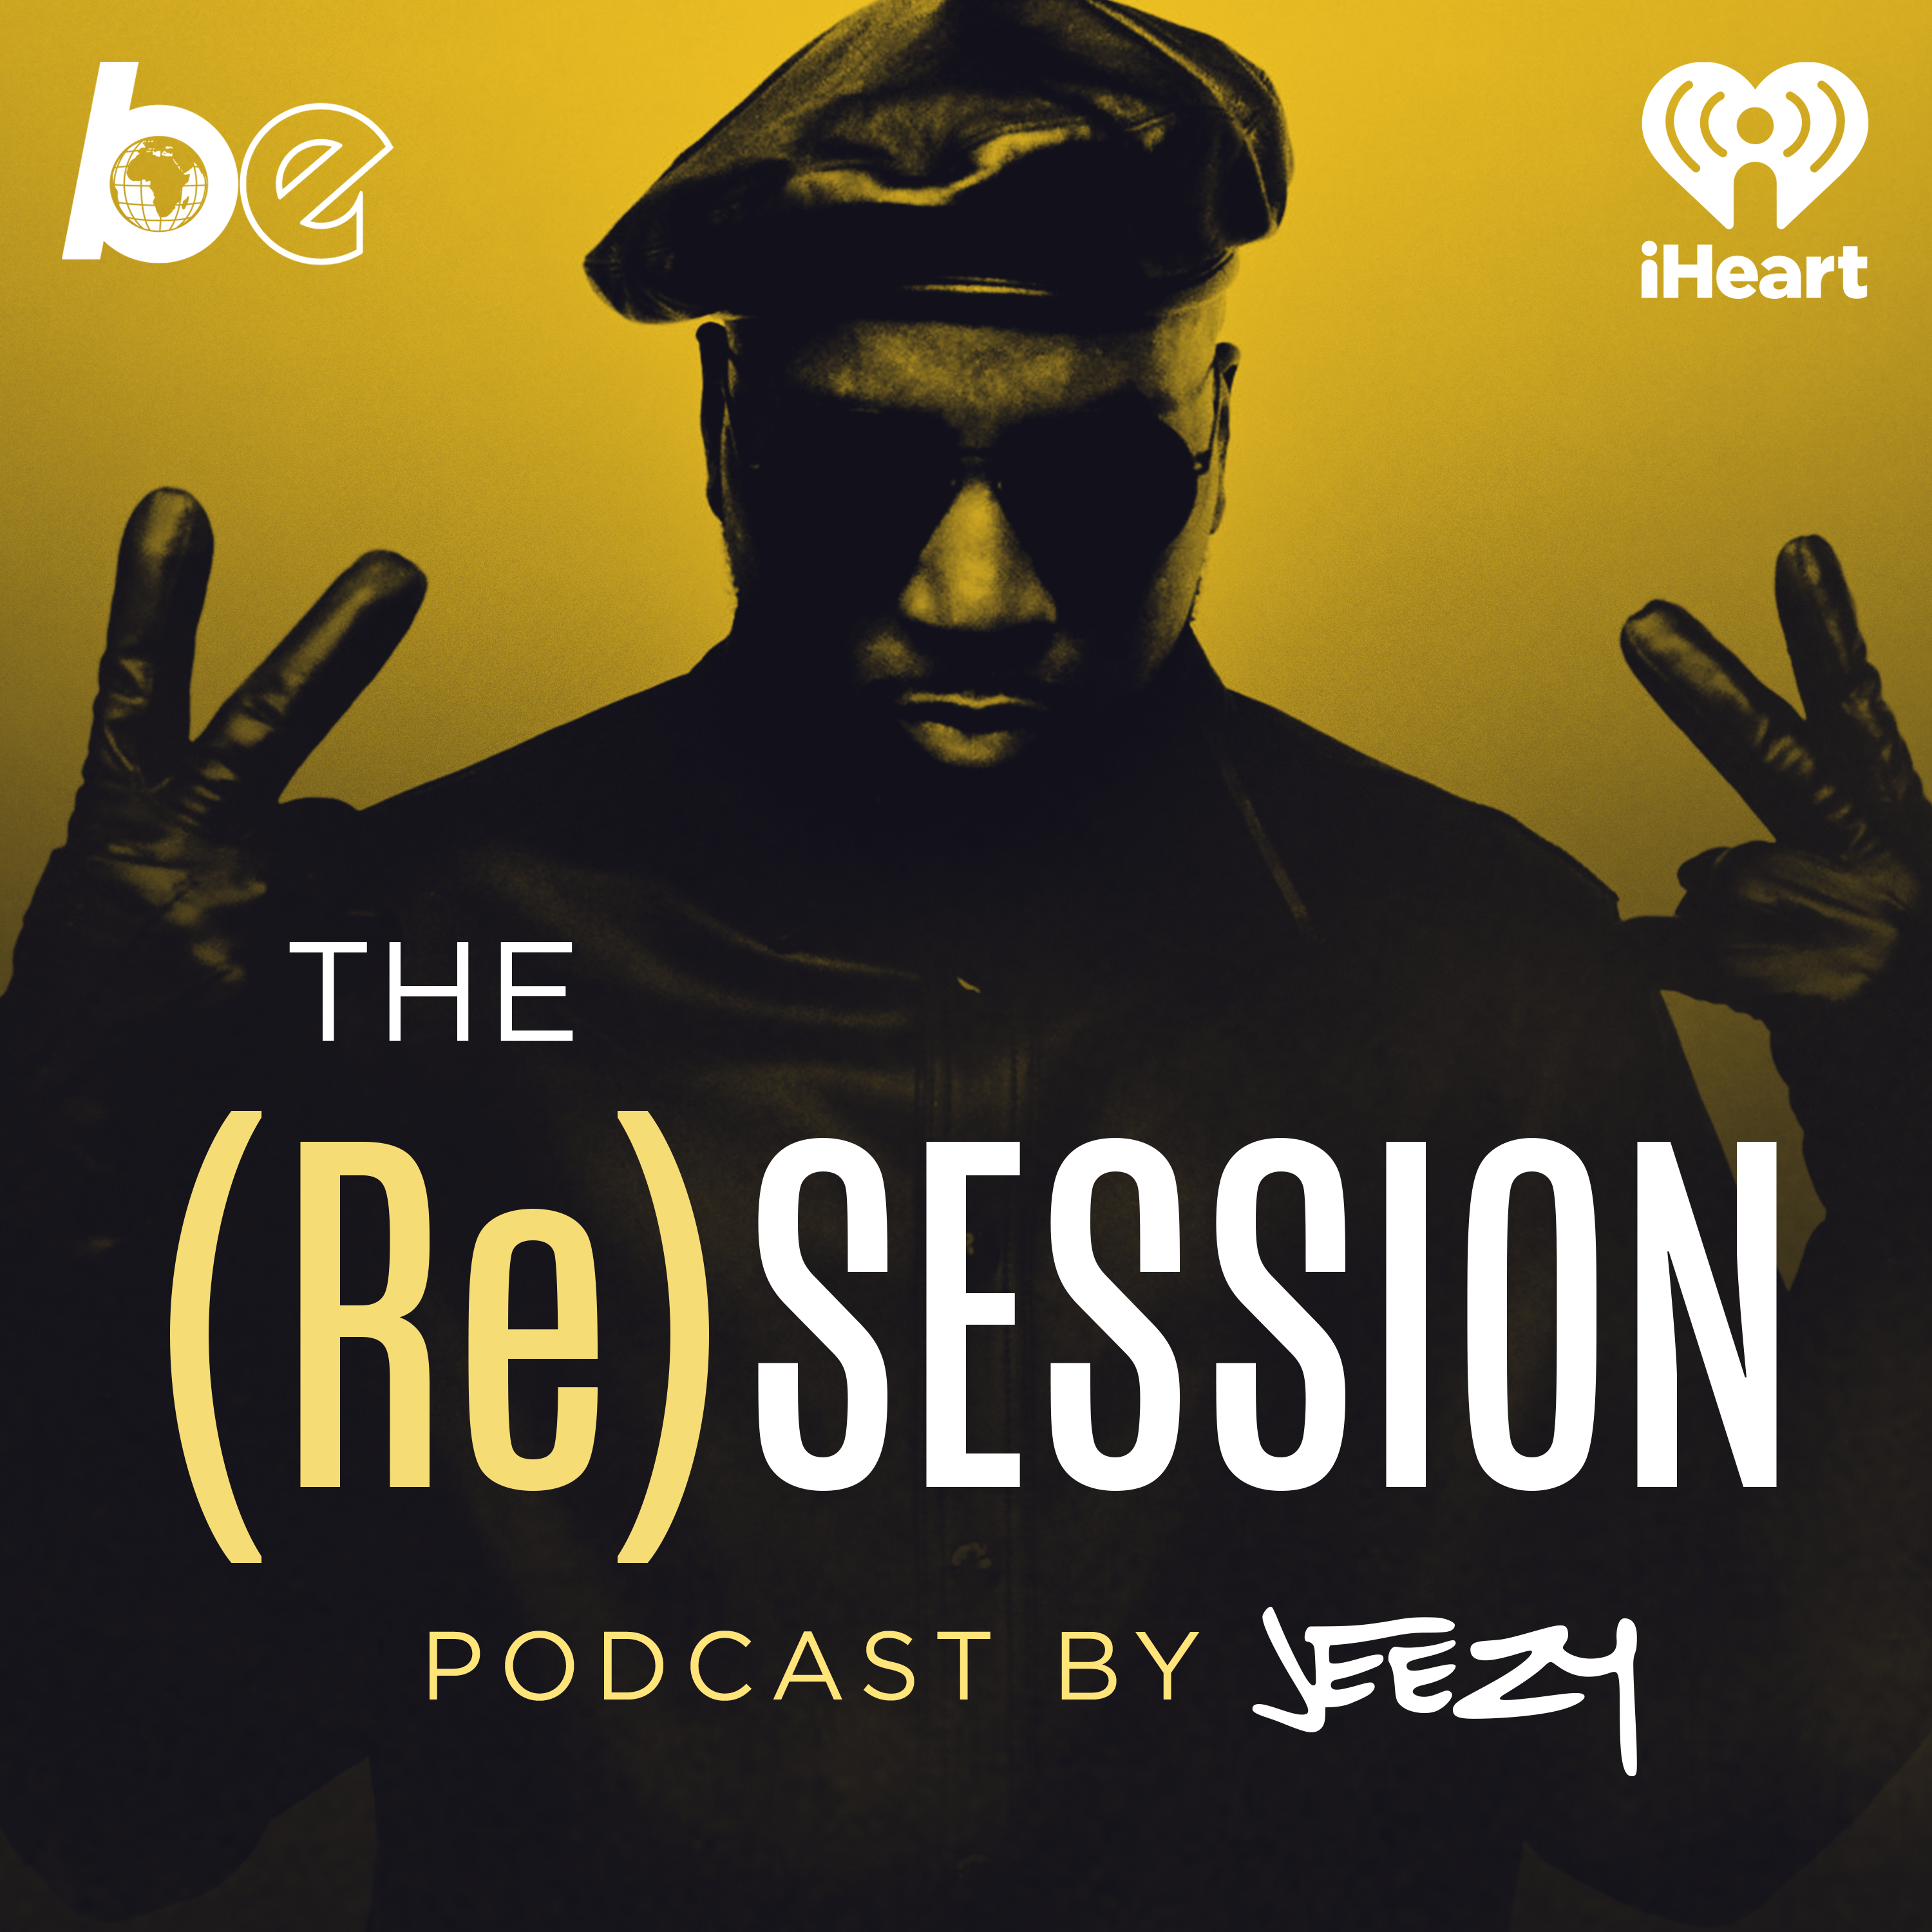 Ari Melber On Politics & Music | Ep 8 | (Re)Session Podcast by Jeezy